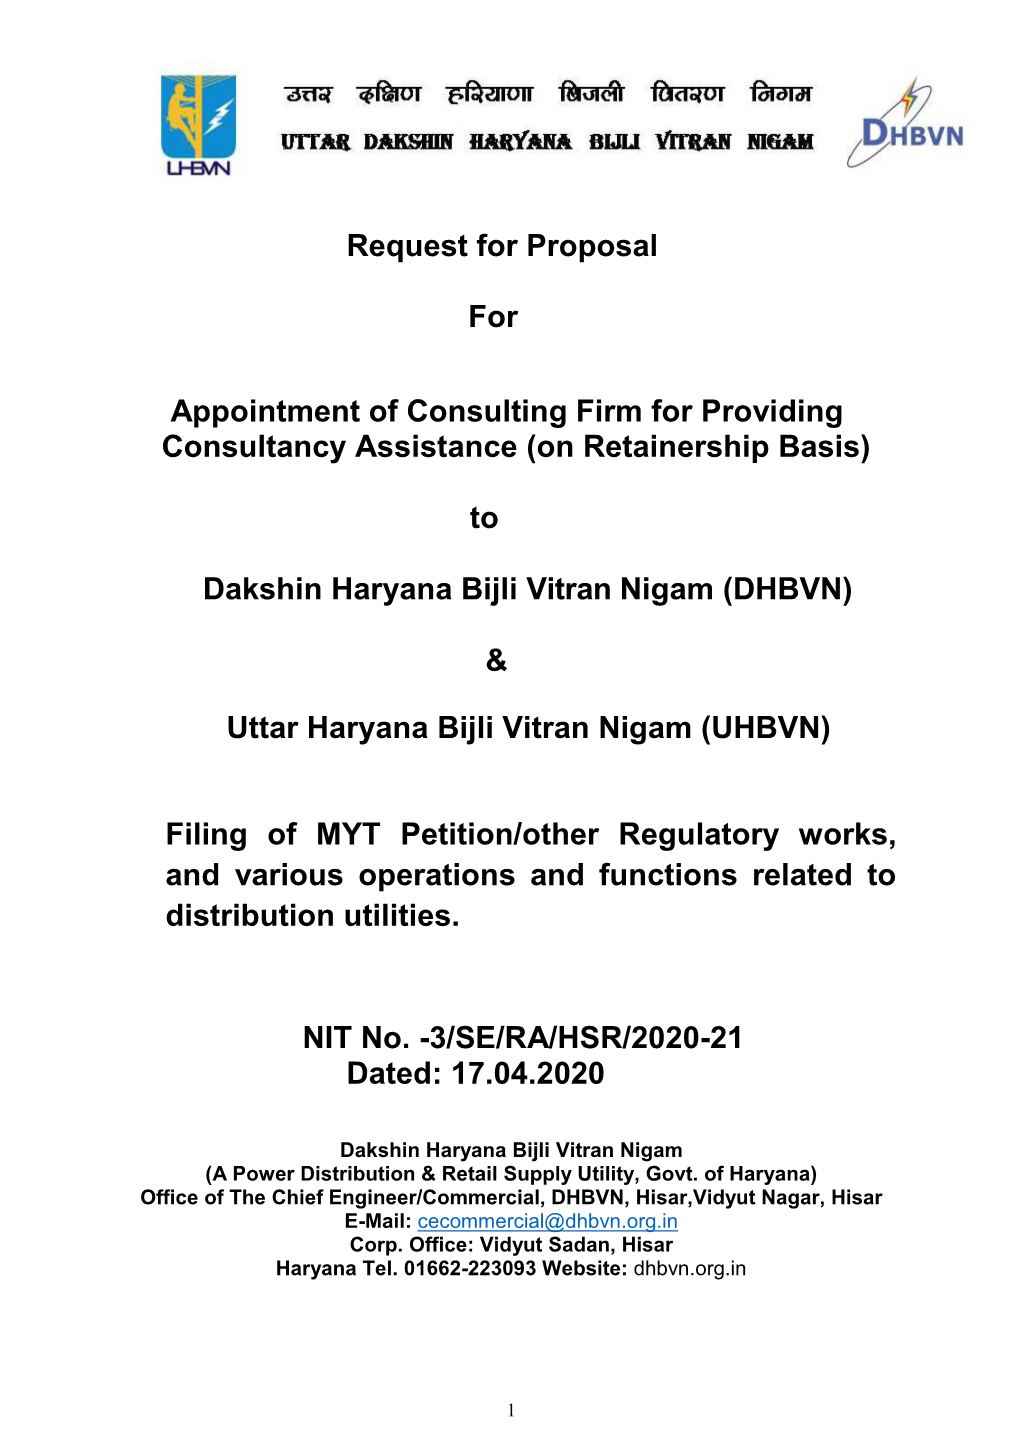 Request for Proposal for Appointment of Consulting Firm for Providing